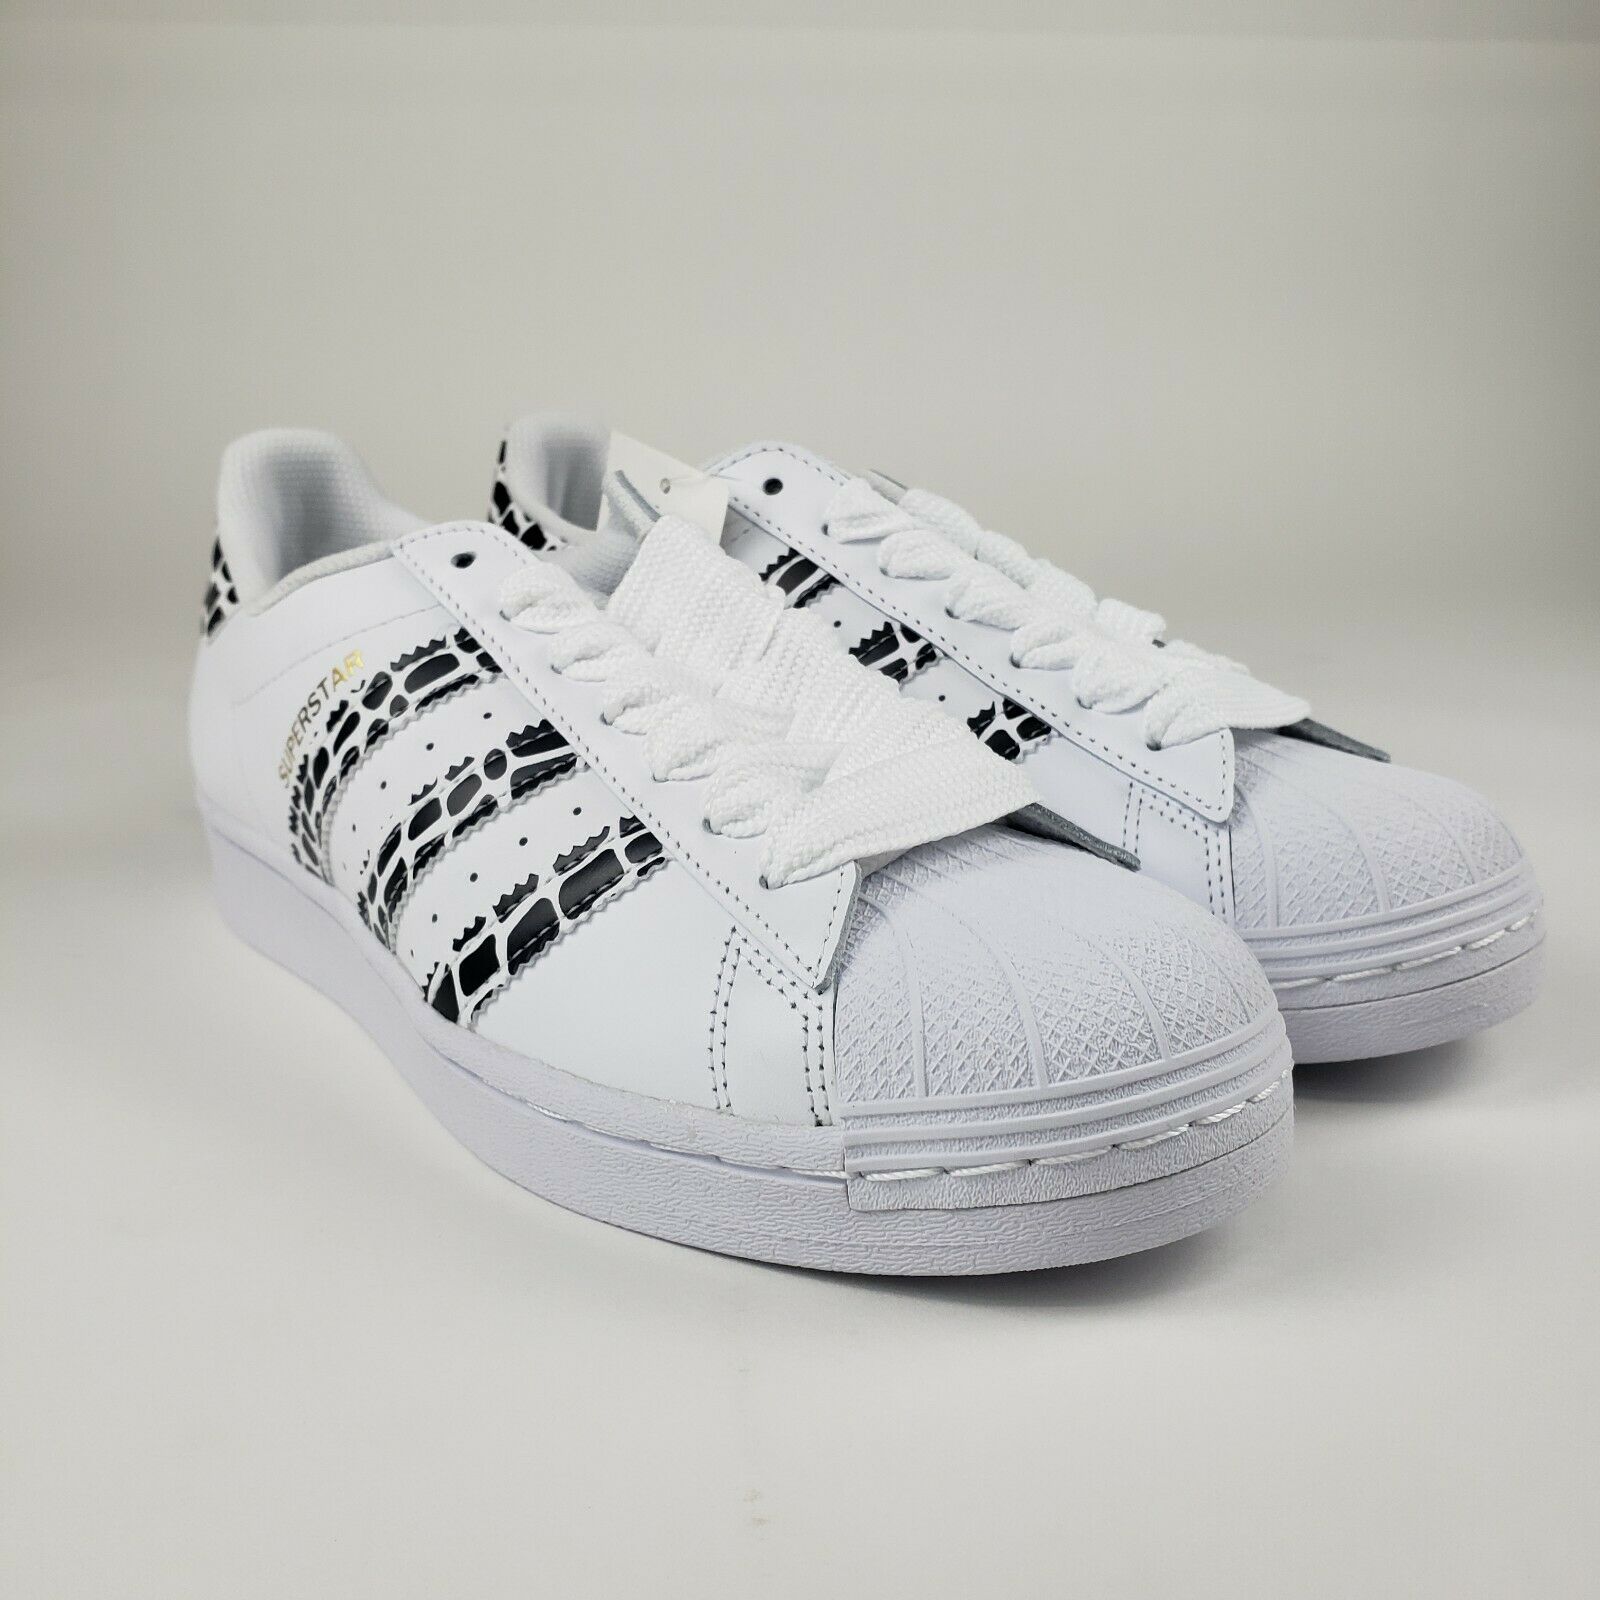 adidas Superstar Women 8.5 Originals Shoes White Leopard Stripes Casual Sneakers